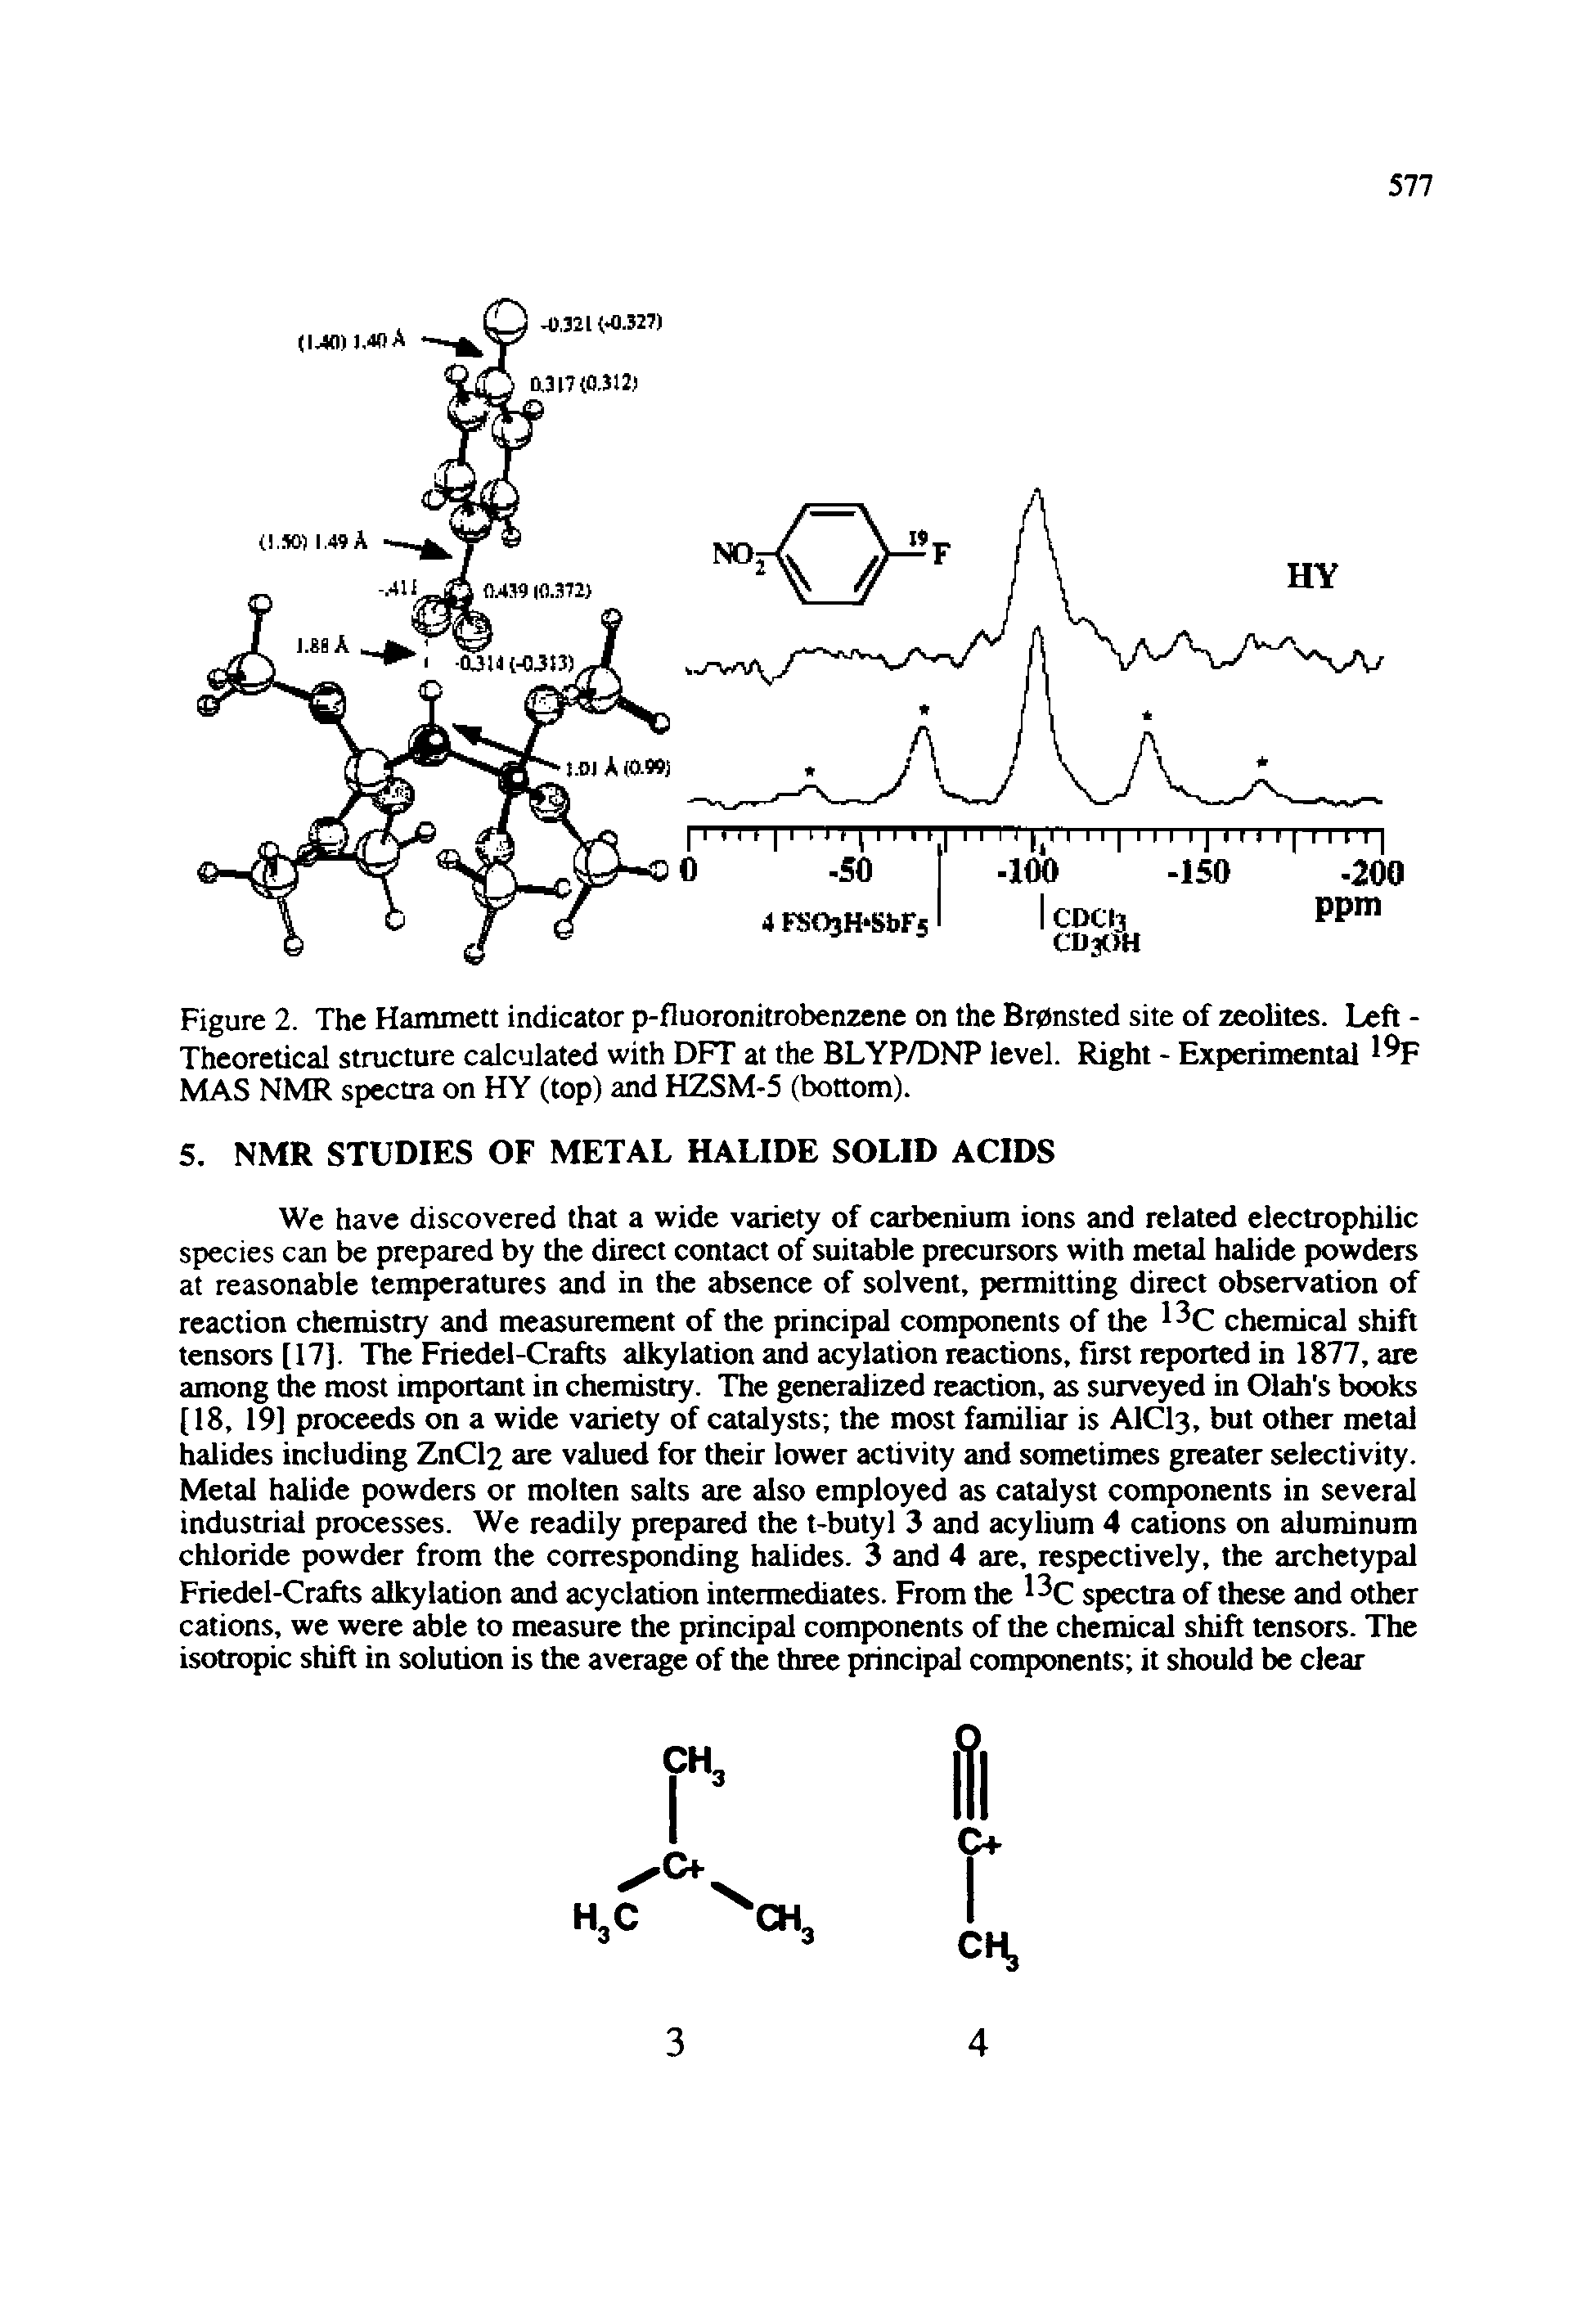 Figure 2. The Hammett indicator p-fluoronitrobenzene on the Br0nsted site of zeolites. Left -Theoretical structure calculated with DFT at the BLYP/DNP level. Right - Experimental MAS NMR spectra on HY (top) and HZSM-5 (bottom).